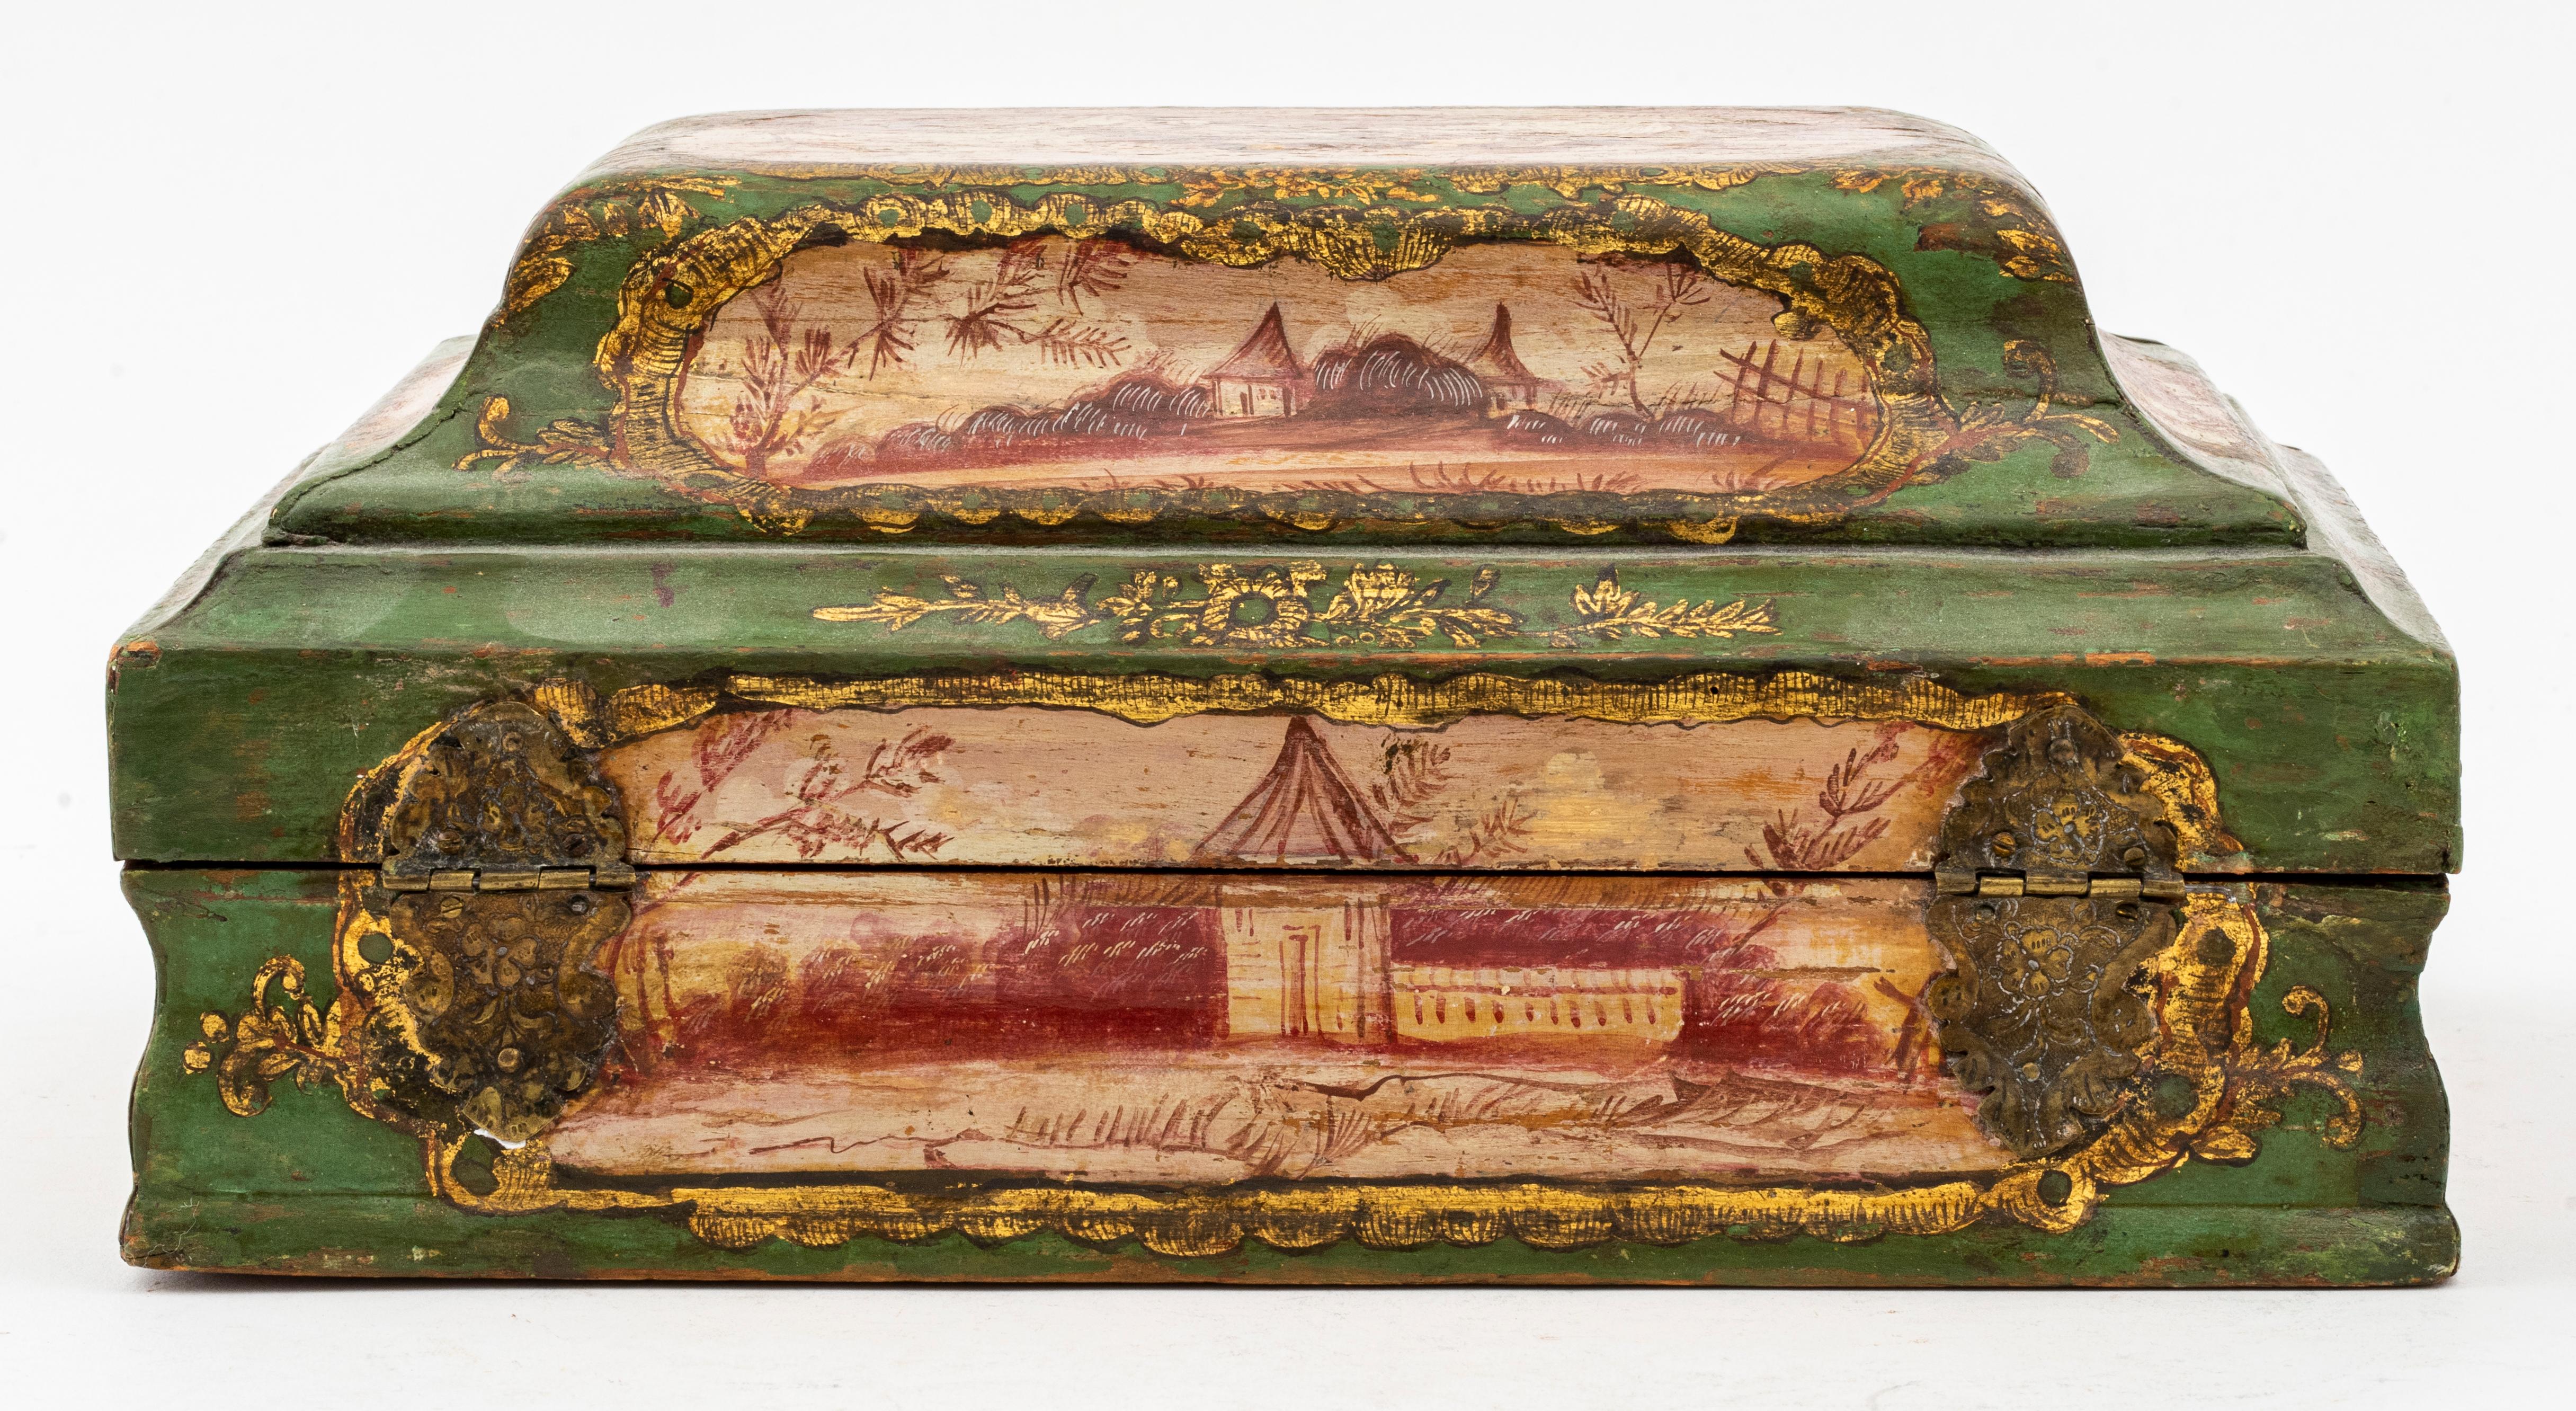 Baroque Manner Hand-Painted Wooden Decorative Box 1